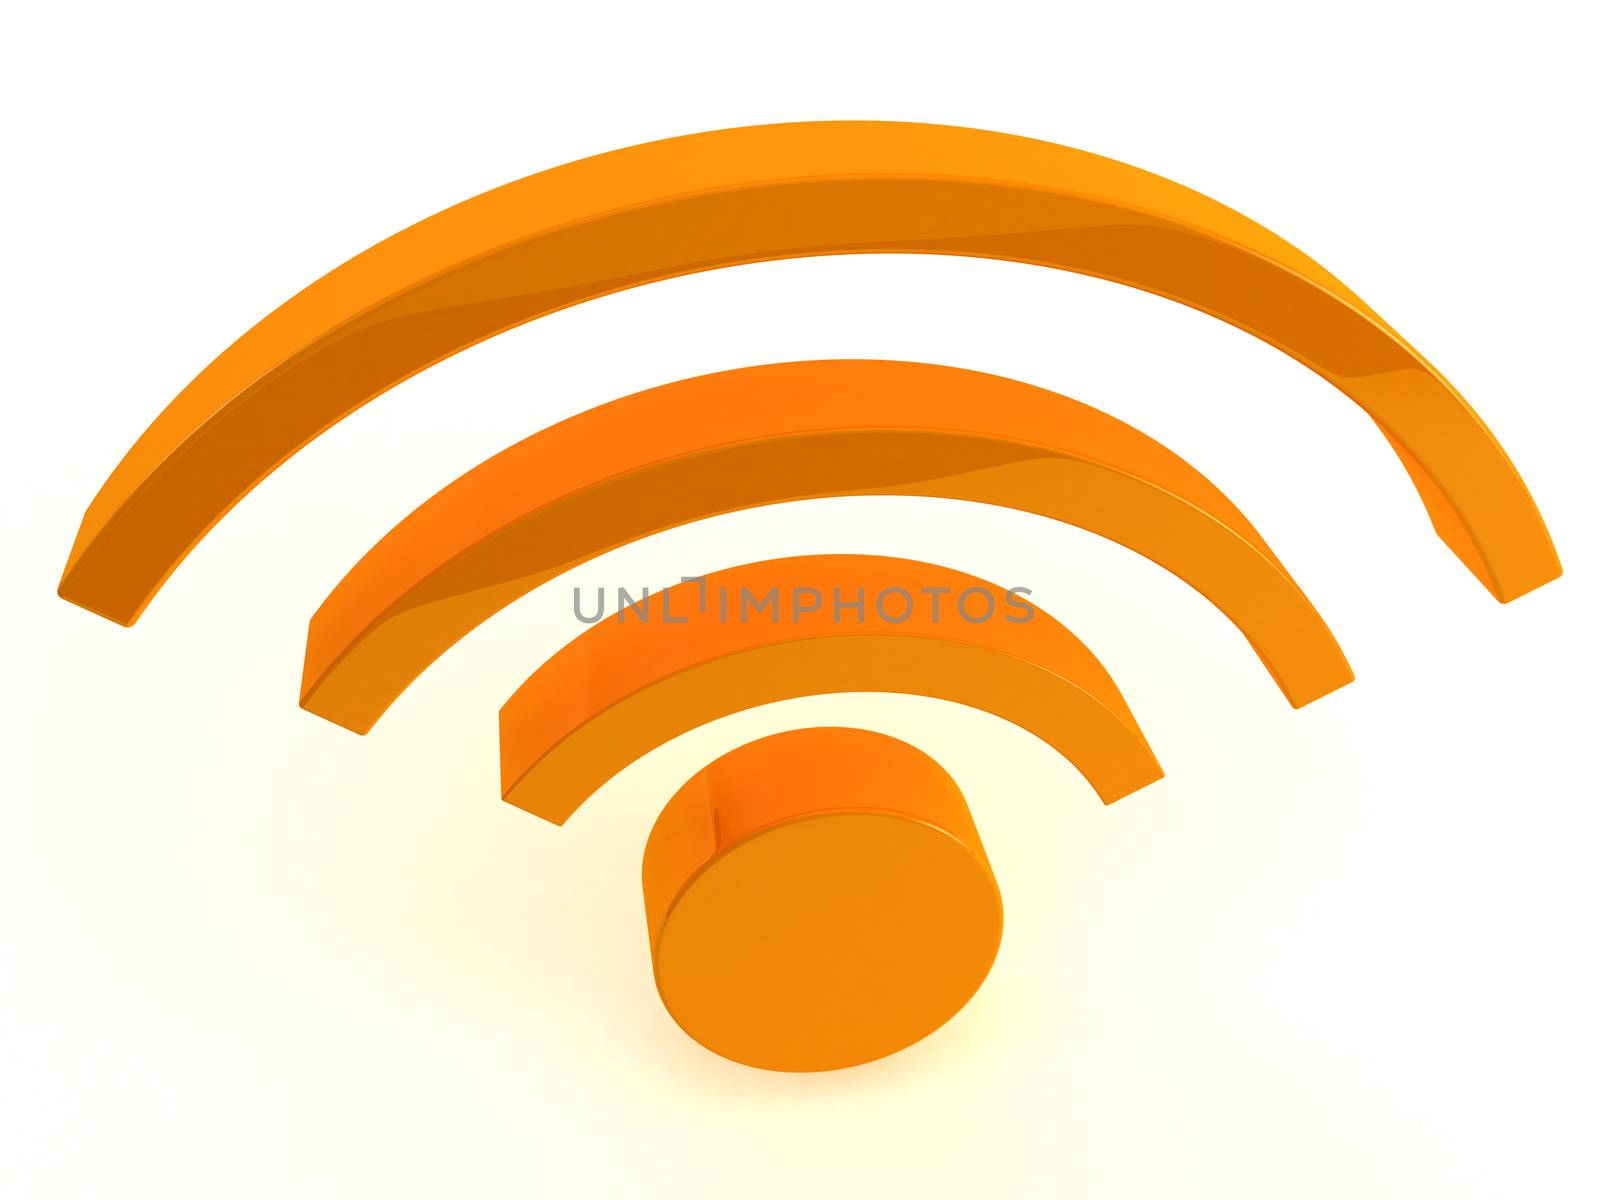 3D render of wifi icon on white background.